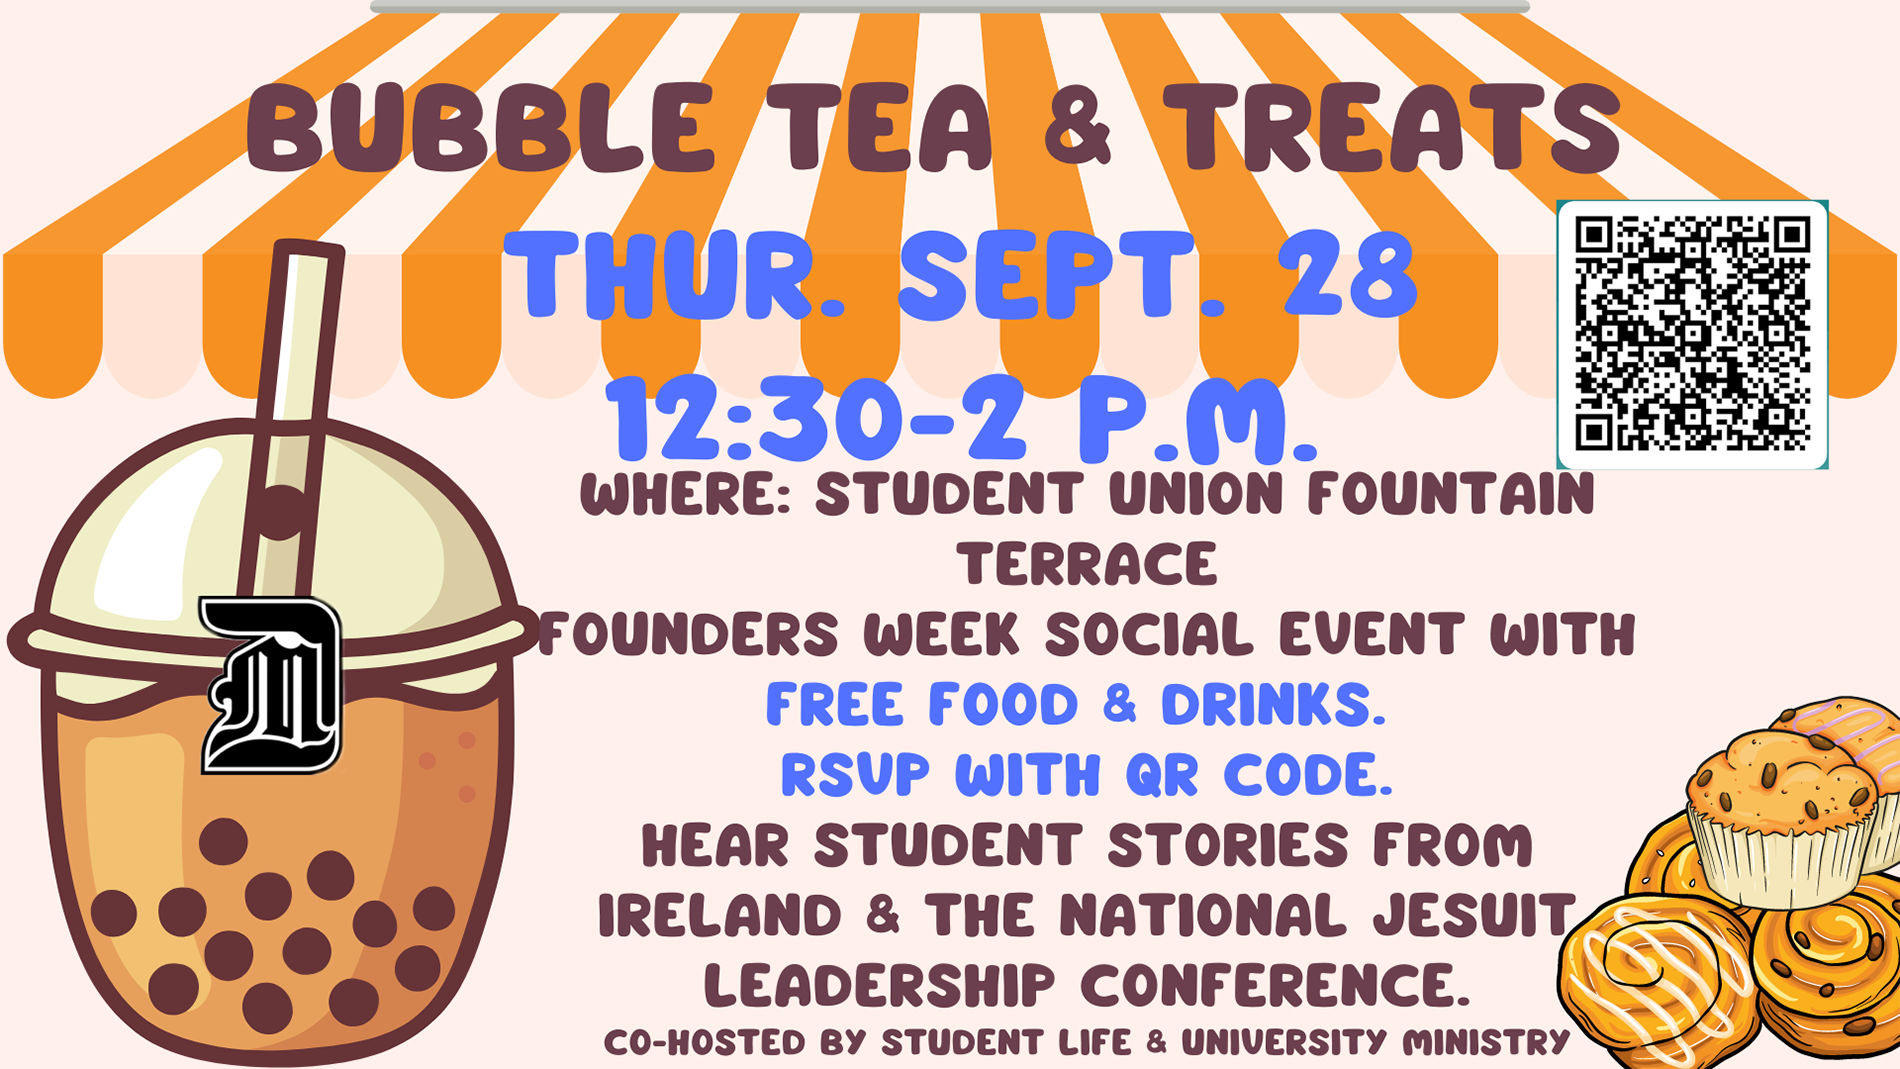 A graphic for Bubble Tea and Treats, Thursday, Sept. 28, 12:30-2 p.m. at the Student Union Fountain Terrace. Founders Week social event with free food and drinks. RSVP with QR code. Hear student stories from Ireland and the National Jesuit Leadership Conference, cohosted by Student Life and University Ministry. Bubble tea with the UDM logo and muffins/breakfast pastries are featured on the graphic.